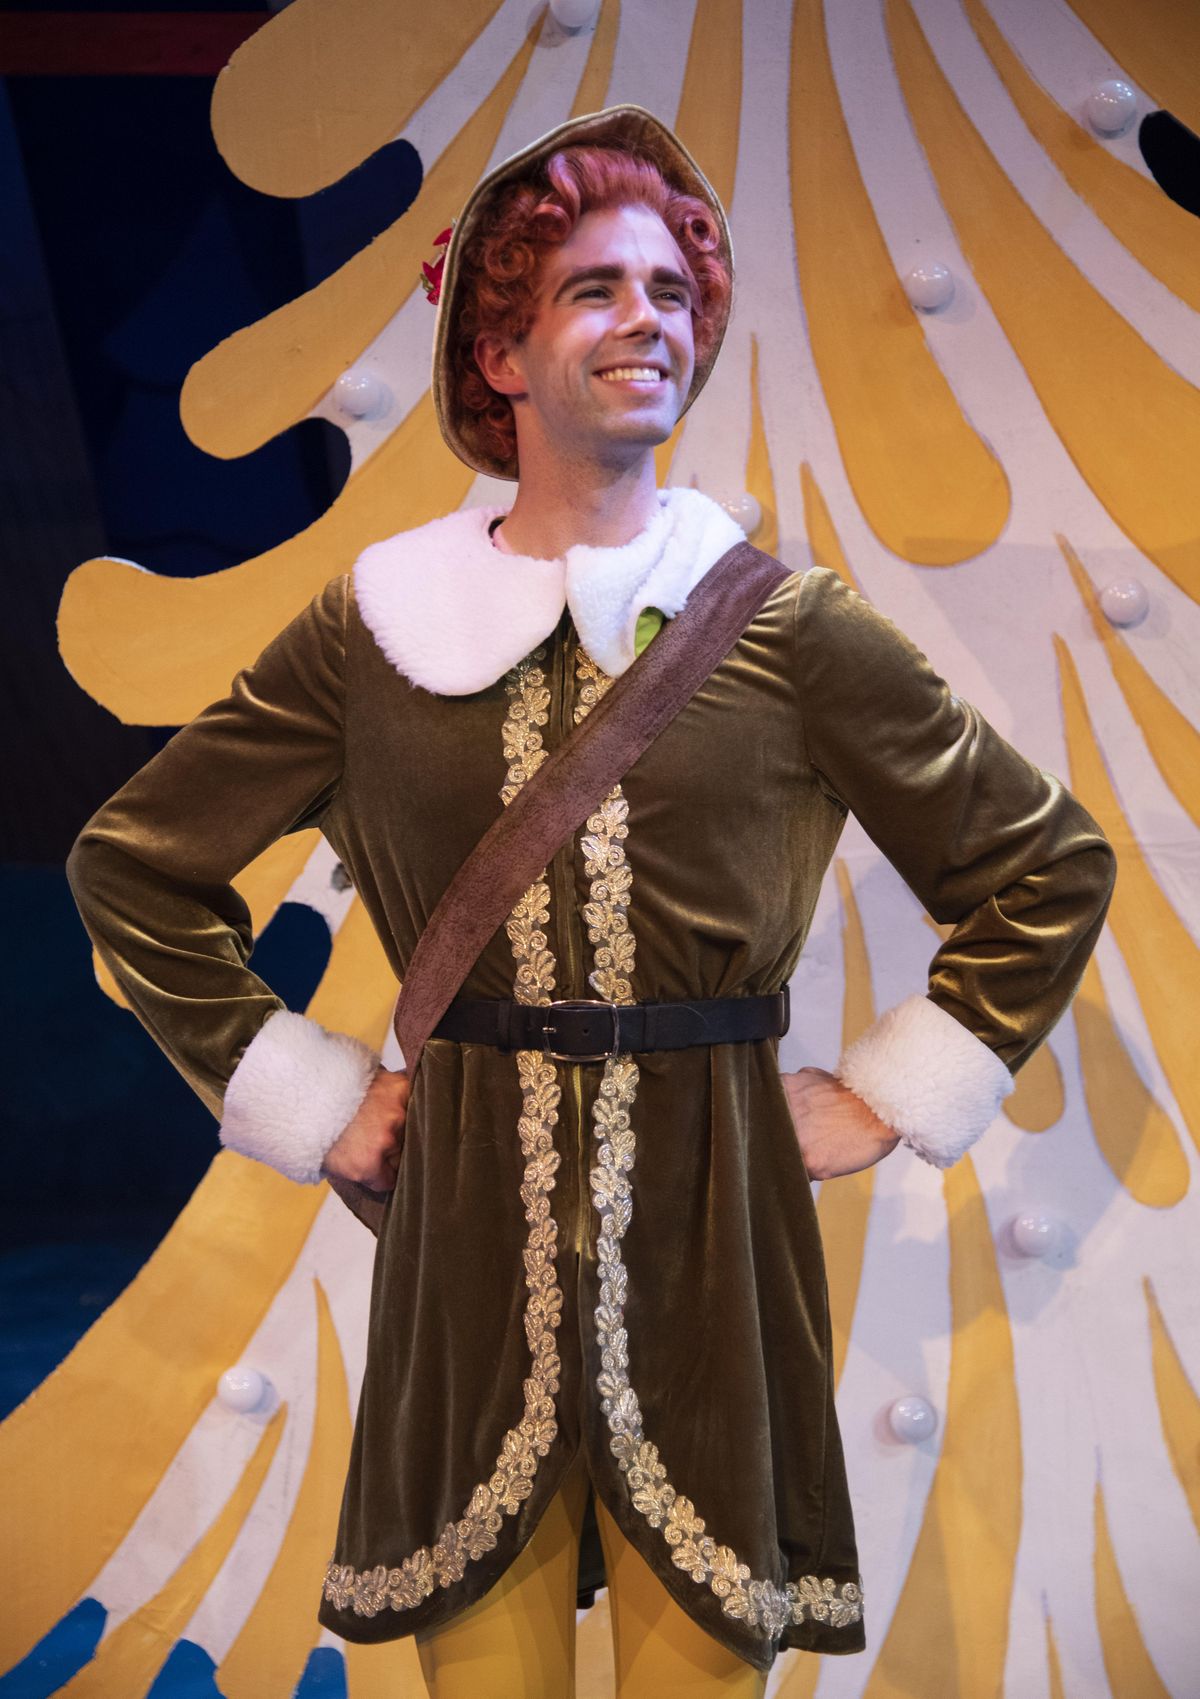 Actor Seth Flanders plays Buddy in the Spokane Civic Theatre production of “Elf the Musical” that opens Nov. 23 and runs through Dec. 23. (Colin Mulvany / The Spokesman-Review)